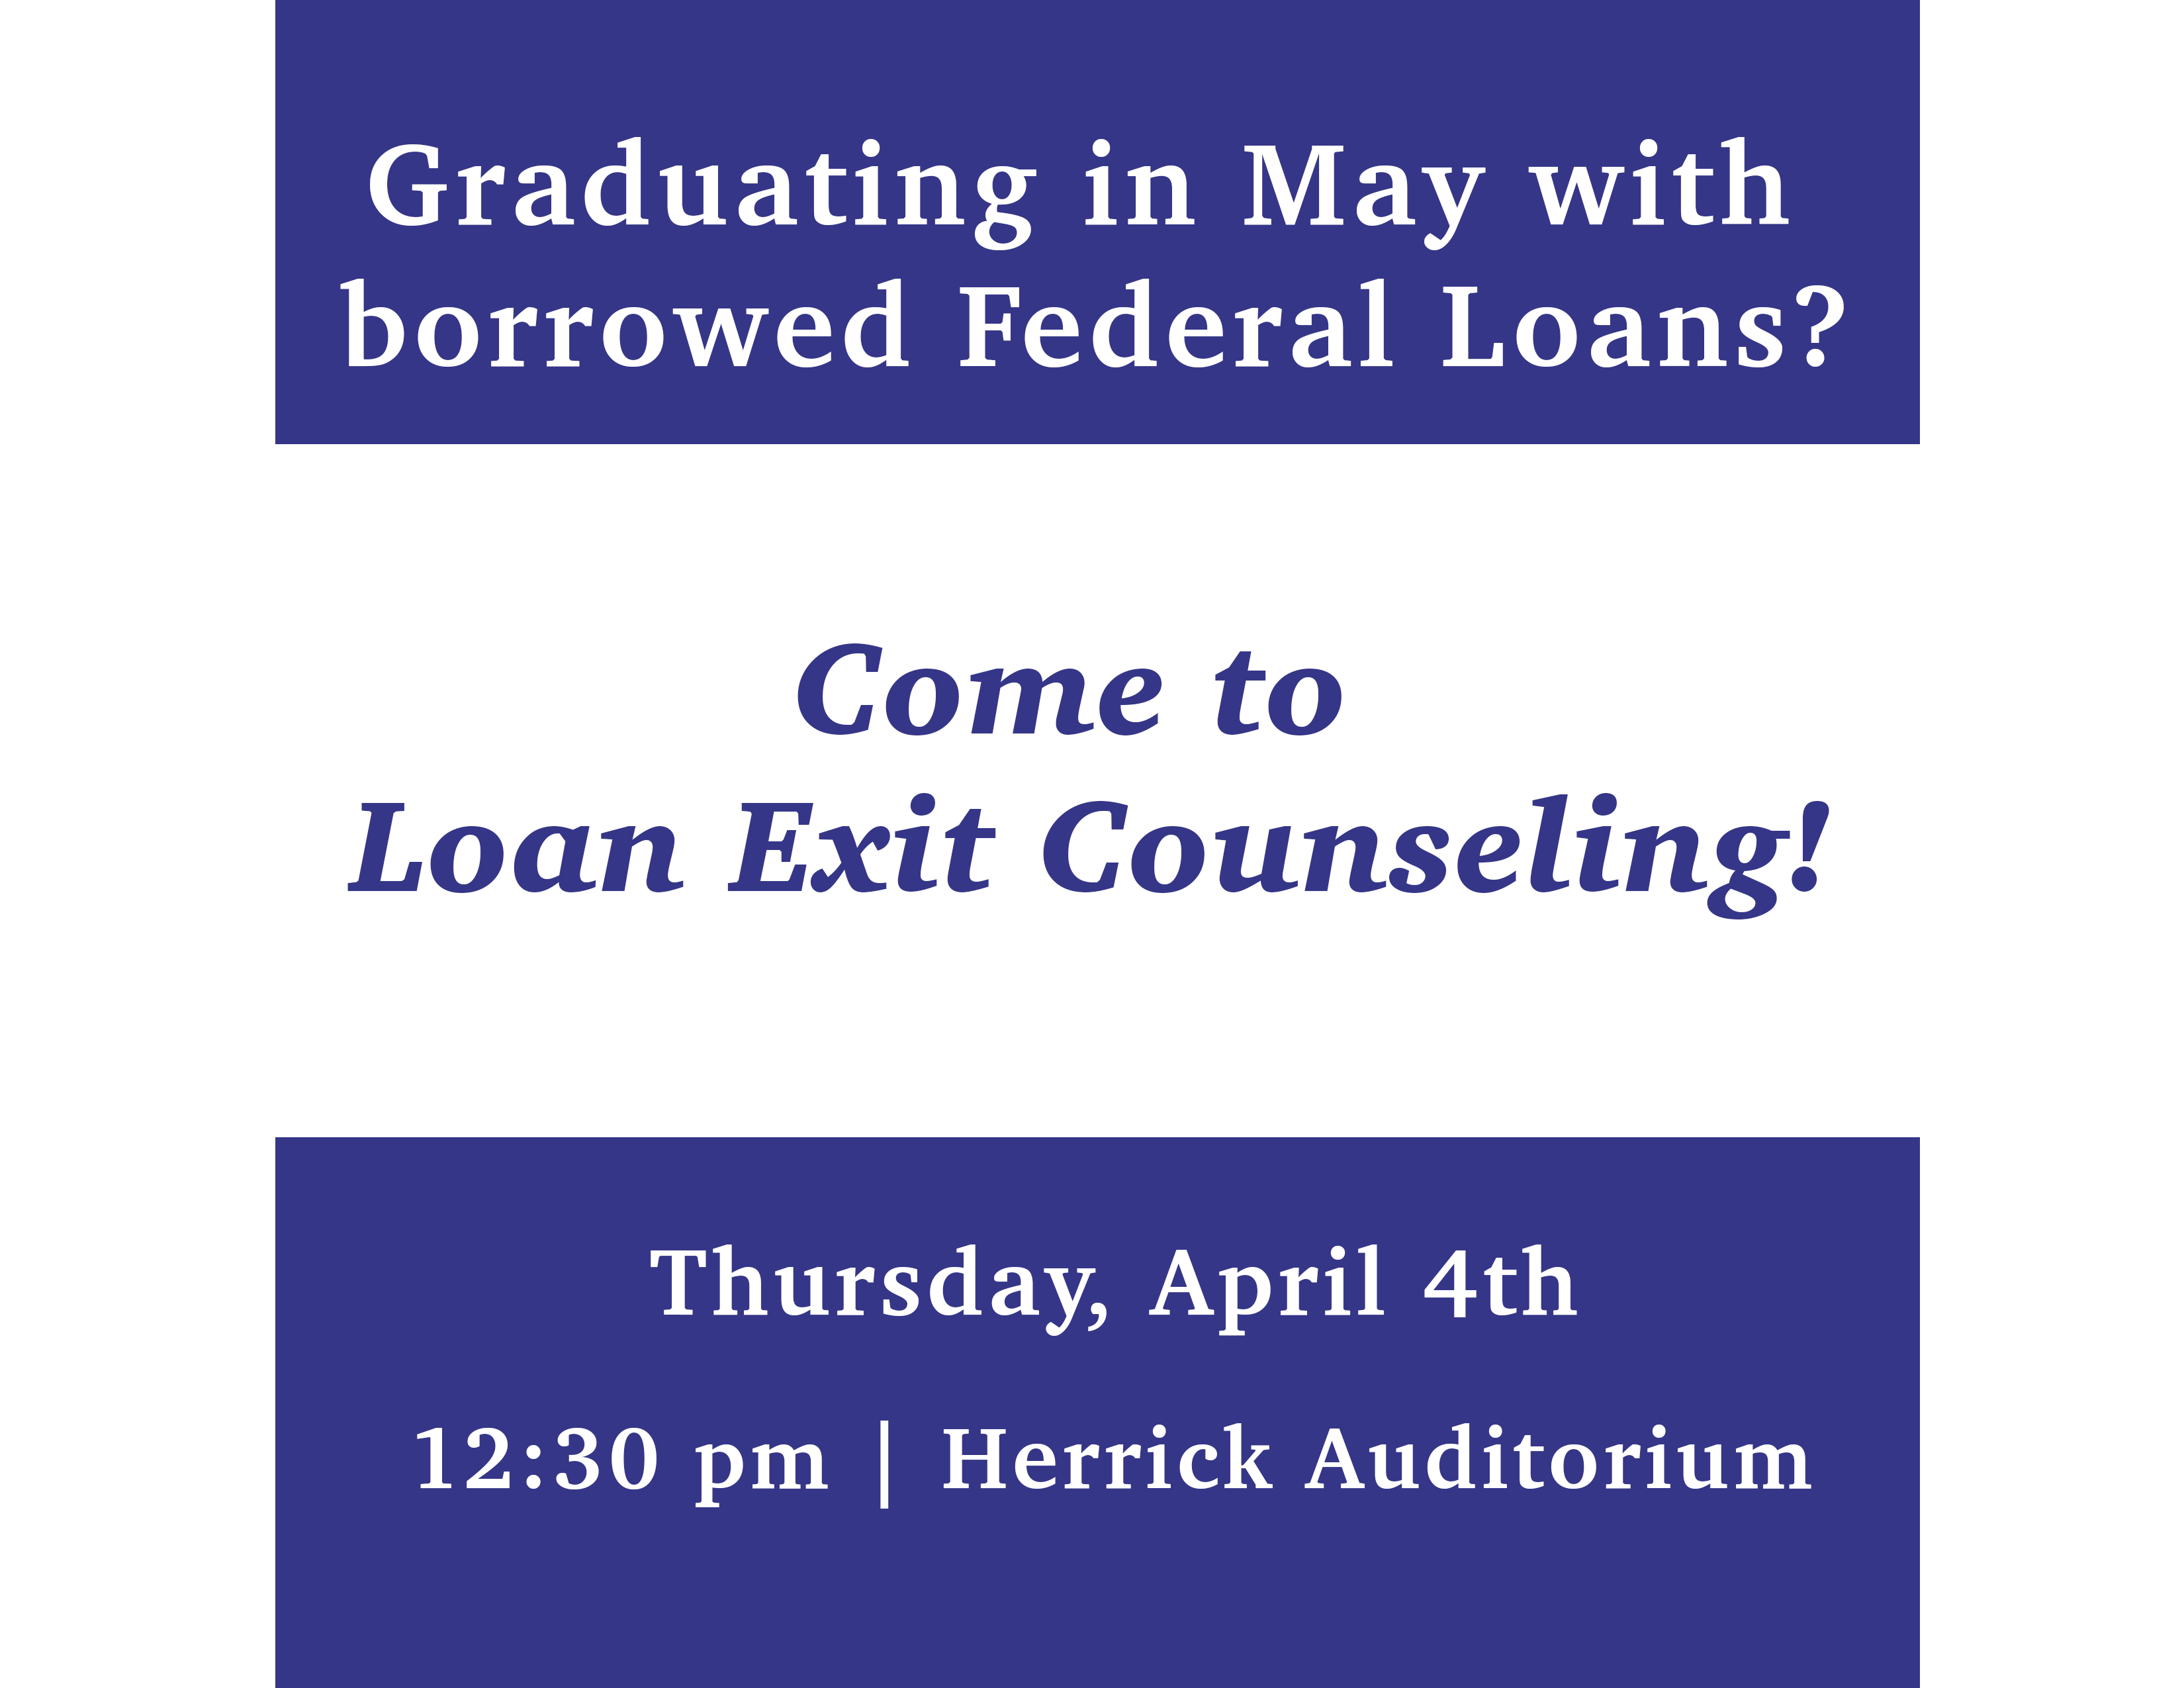 Graduating in May with borrowed Federal Loans?